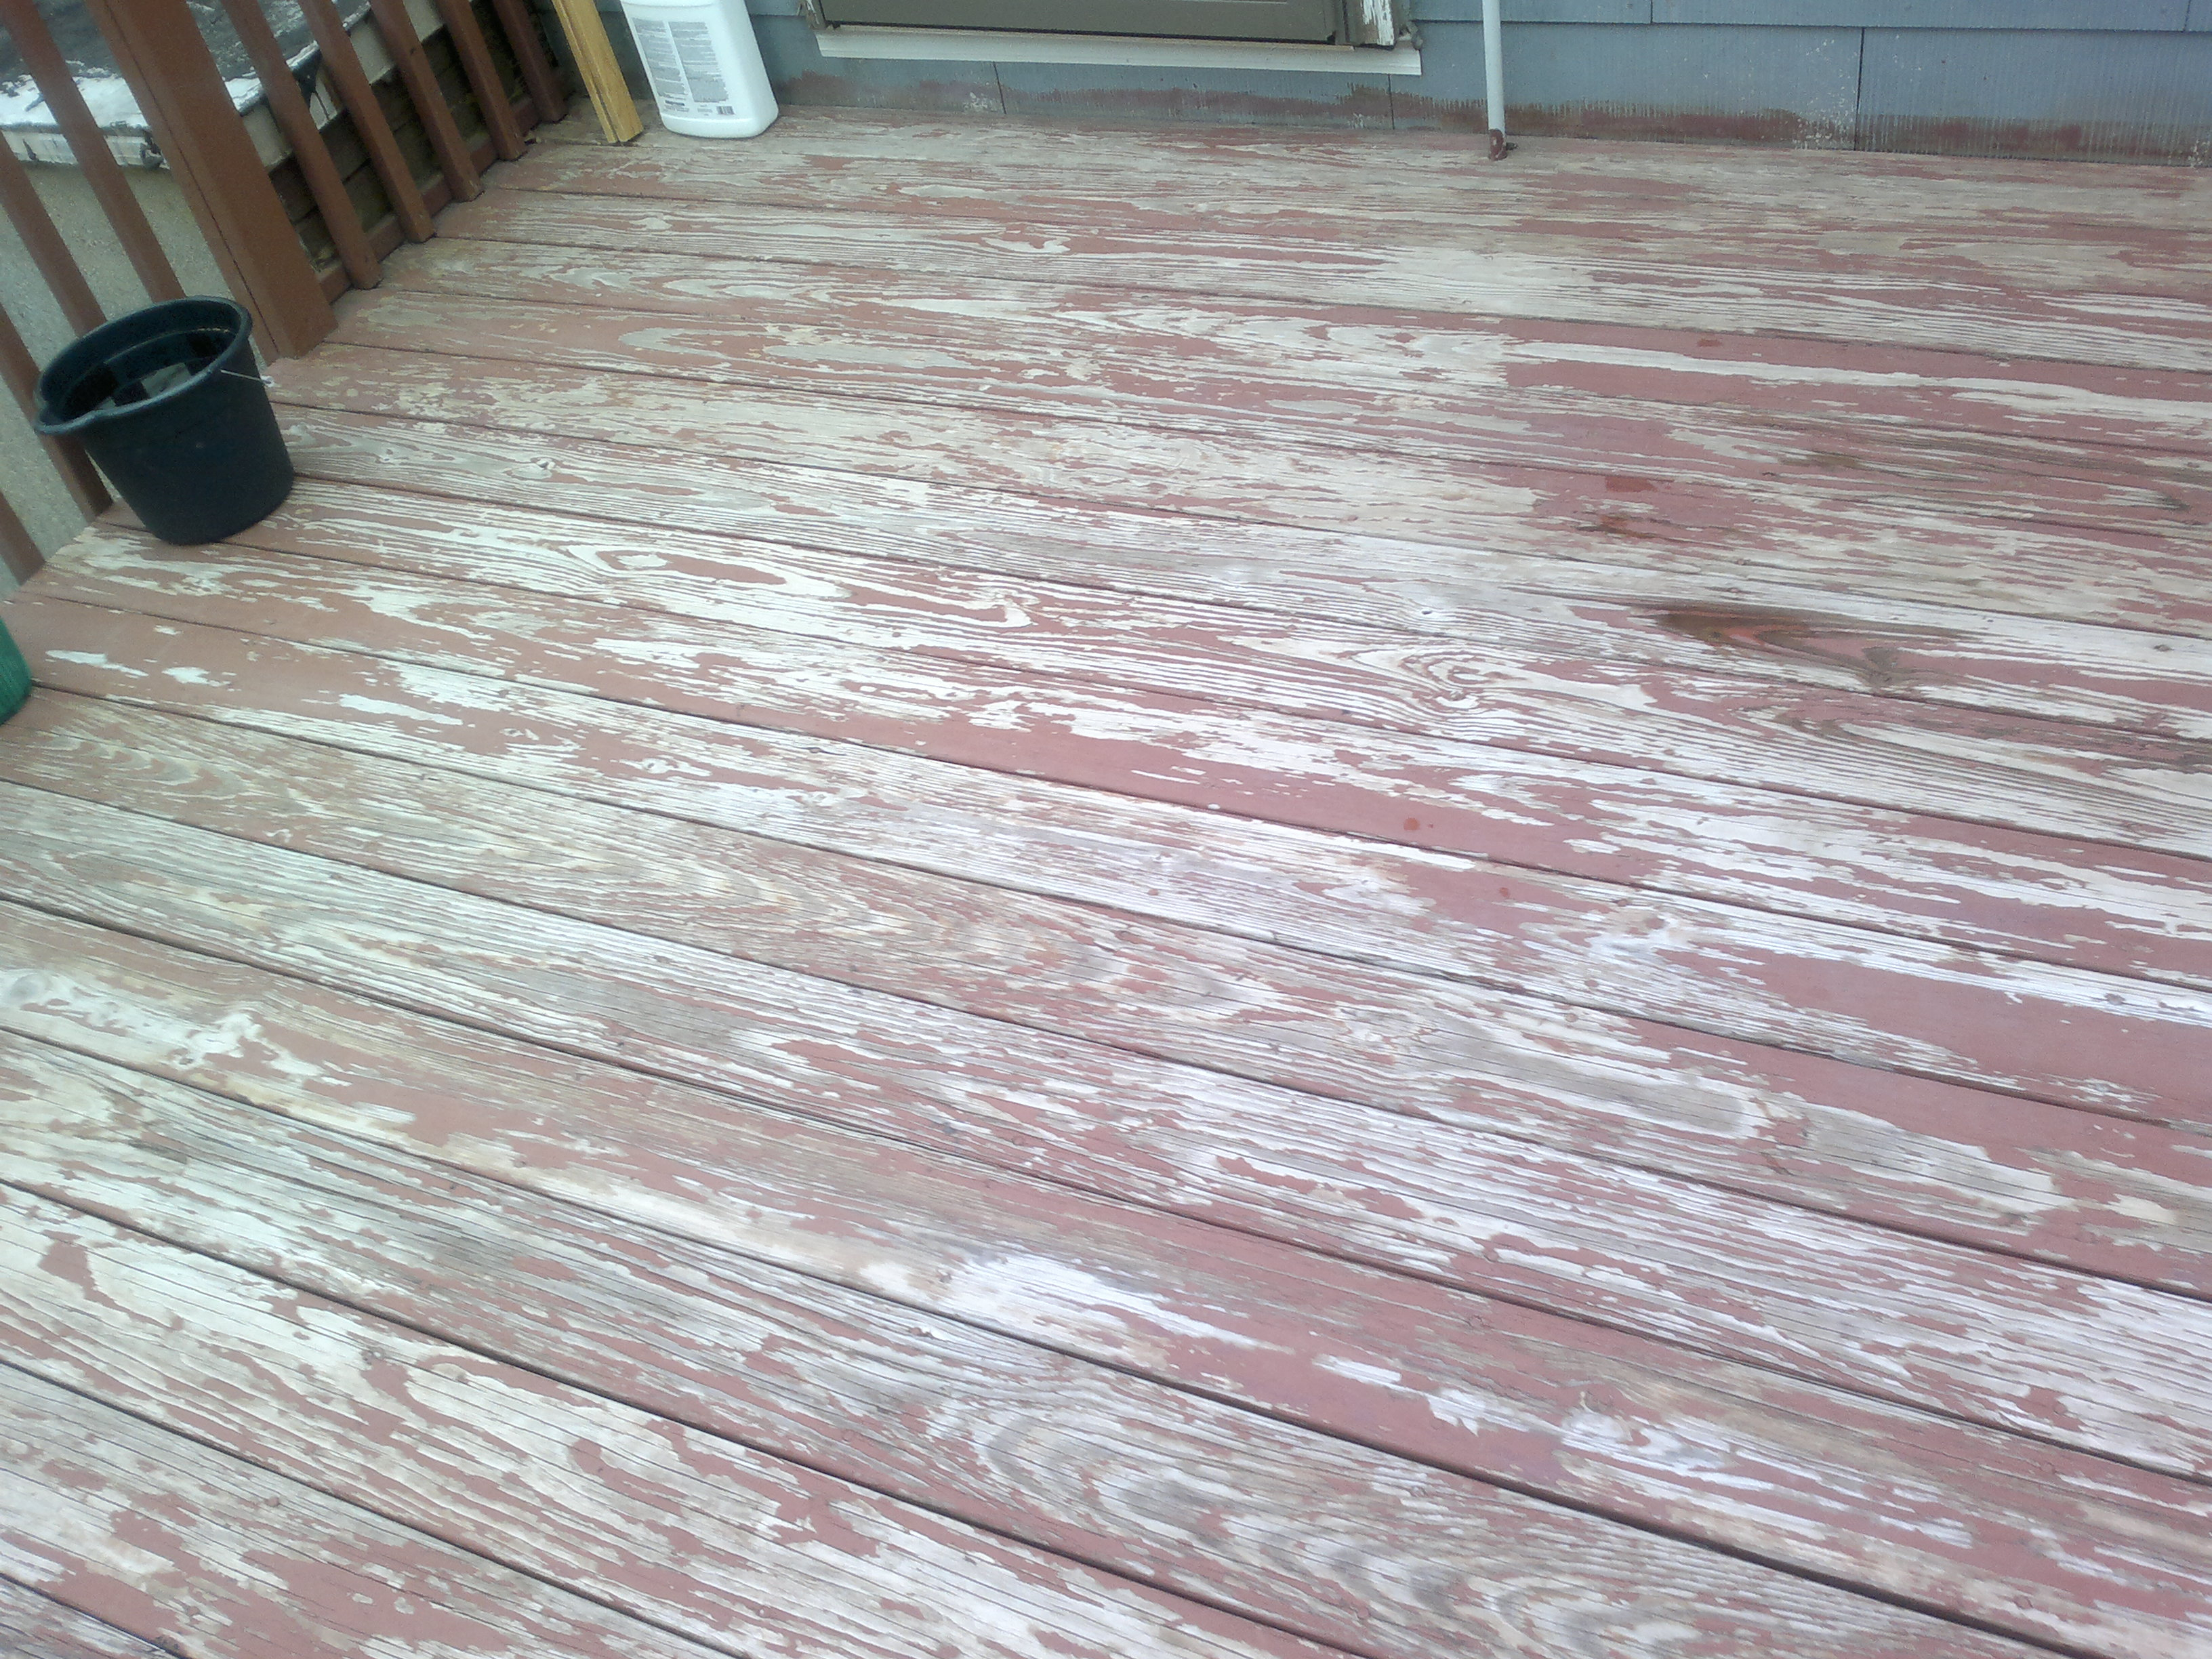 Best Stain For An Old Deck Best Deck Stain Reviews Ratings intended for dimensions 3264 X 2448